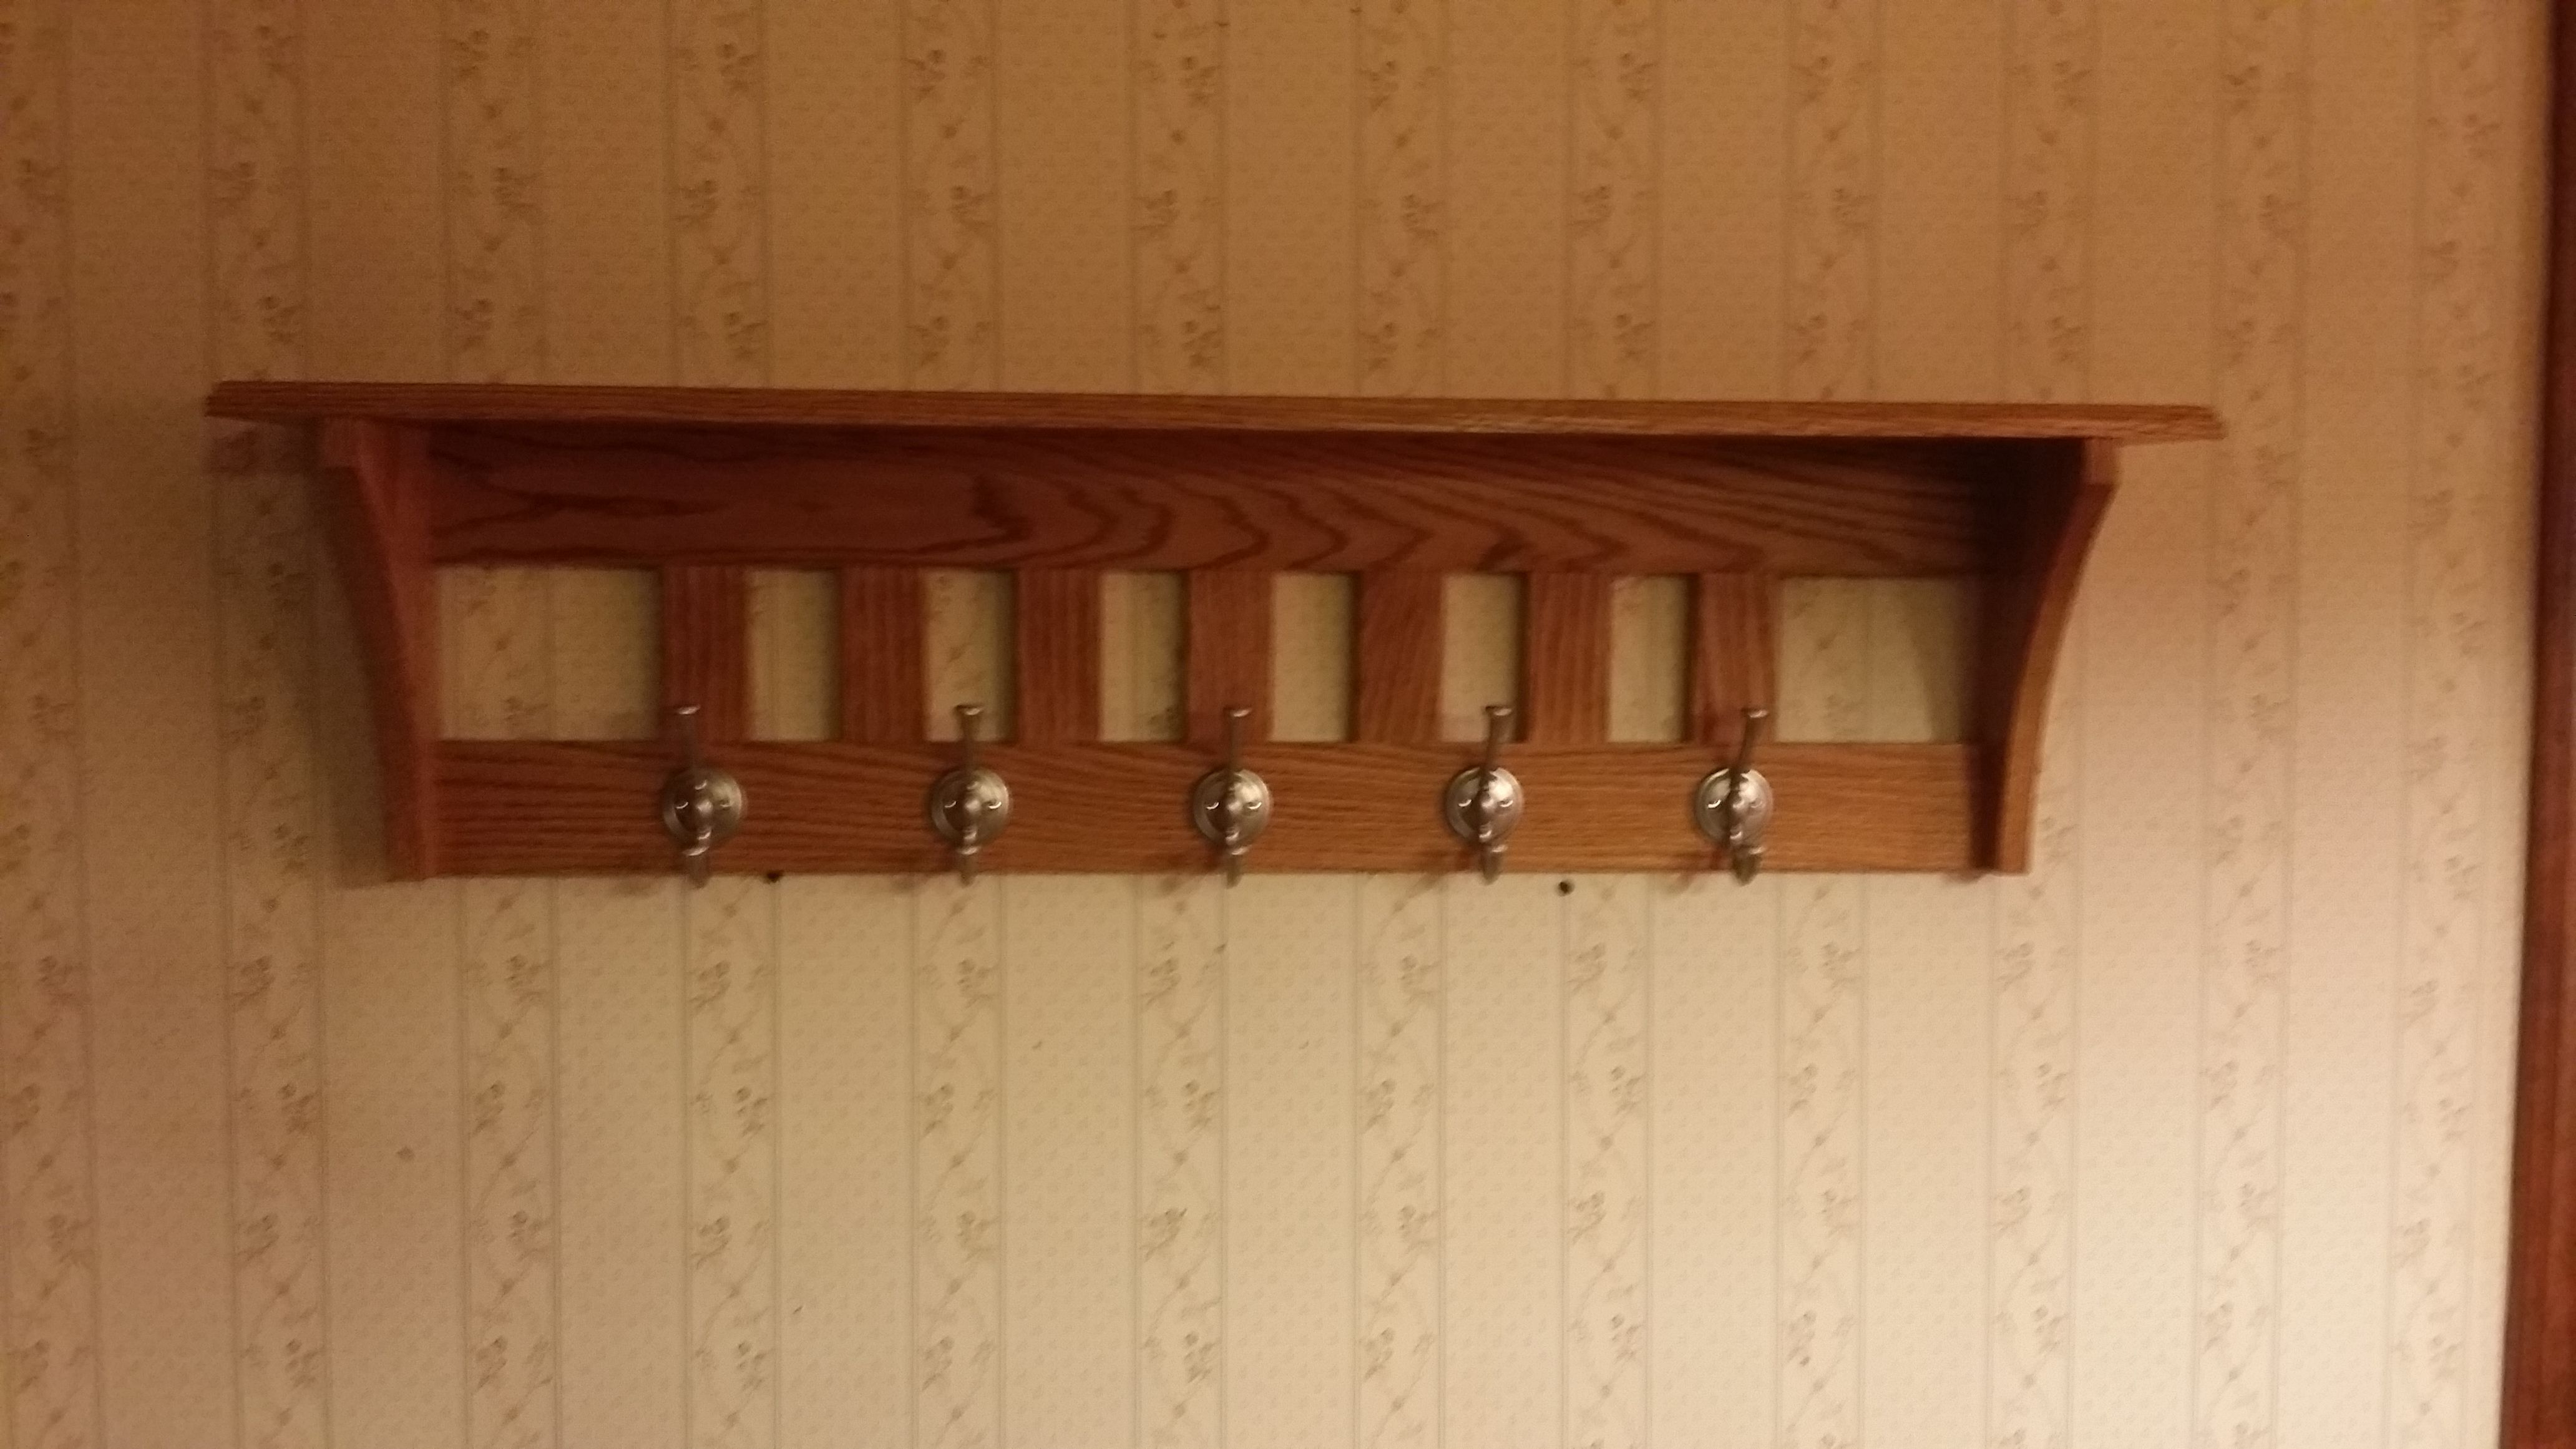 Custom Made Mission Style Coat Rack by All Things Wood CustomMade.com